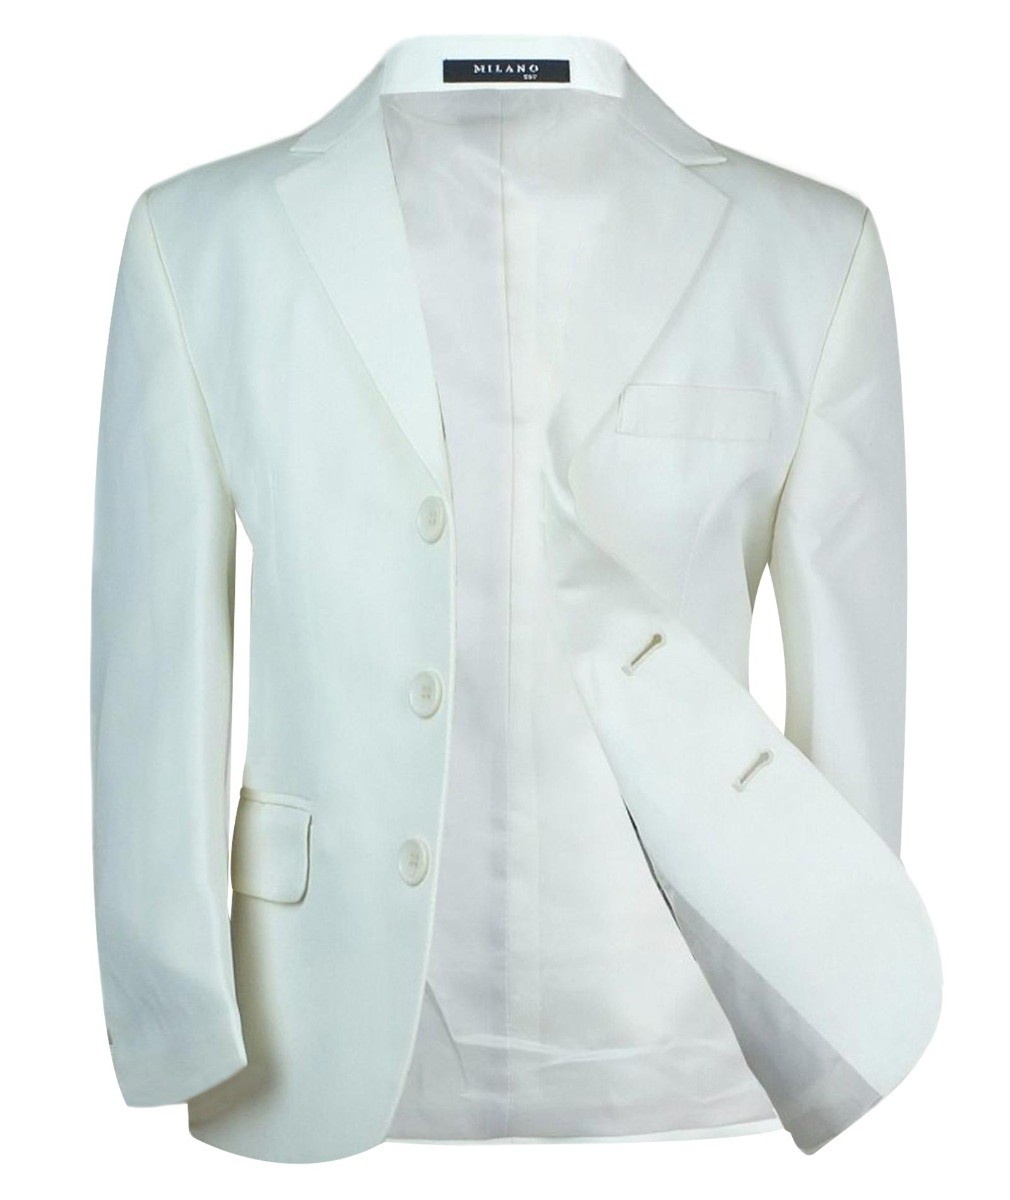 Boys All In One Communion Tailored Fit Suit - Ivory